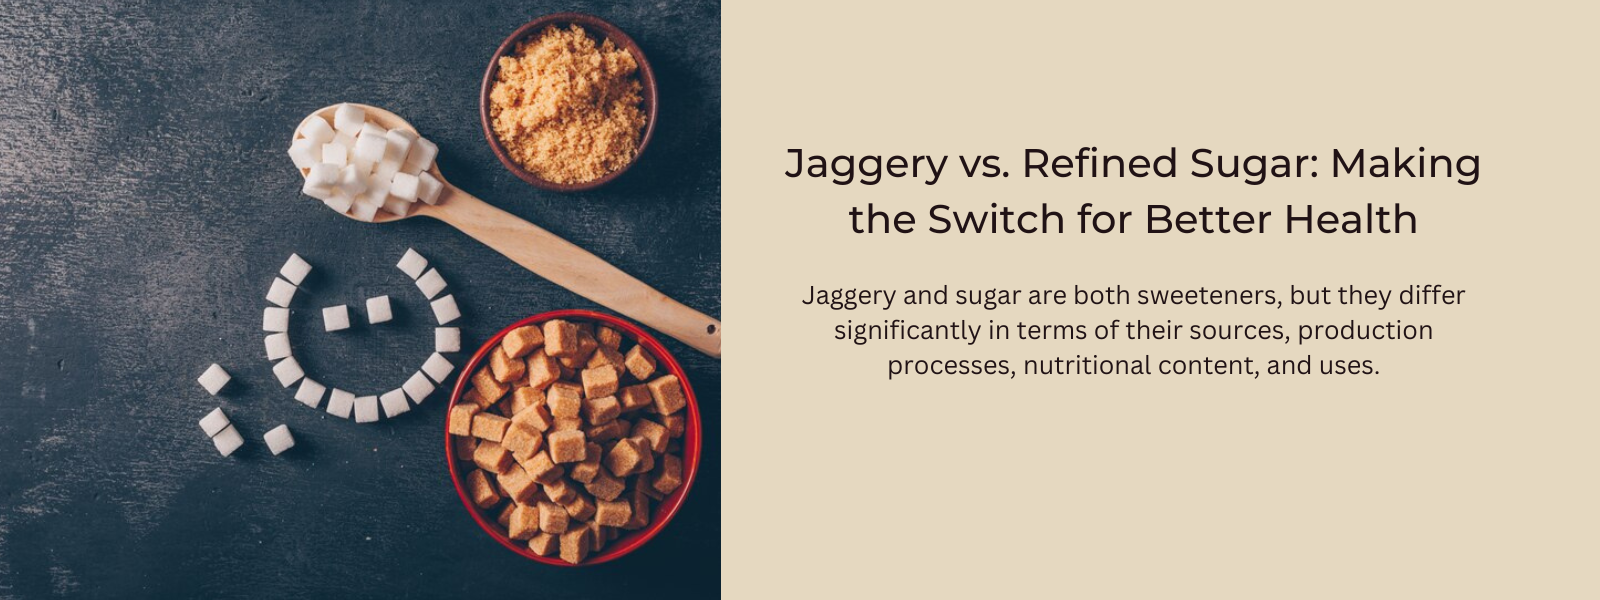 Jaggery vs. Refined Sugar: Making the Switch for Better Health